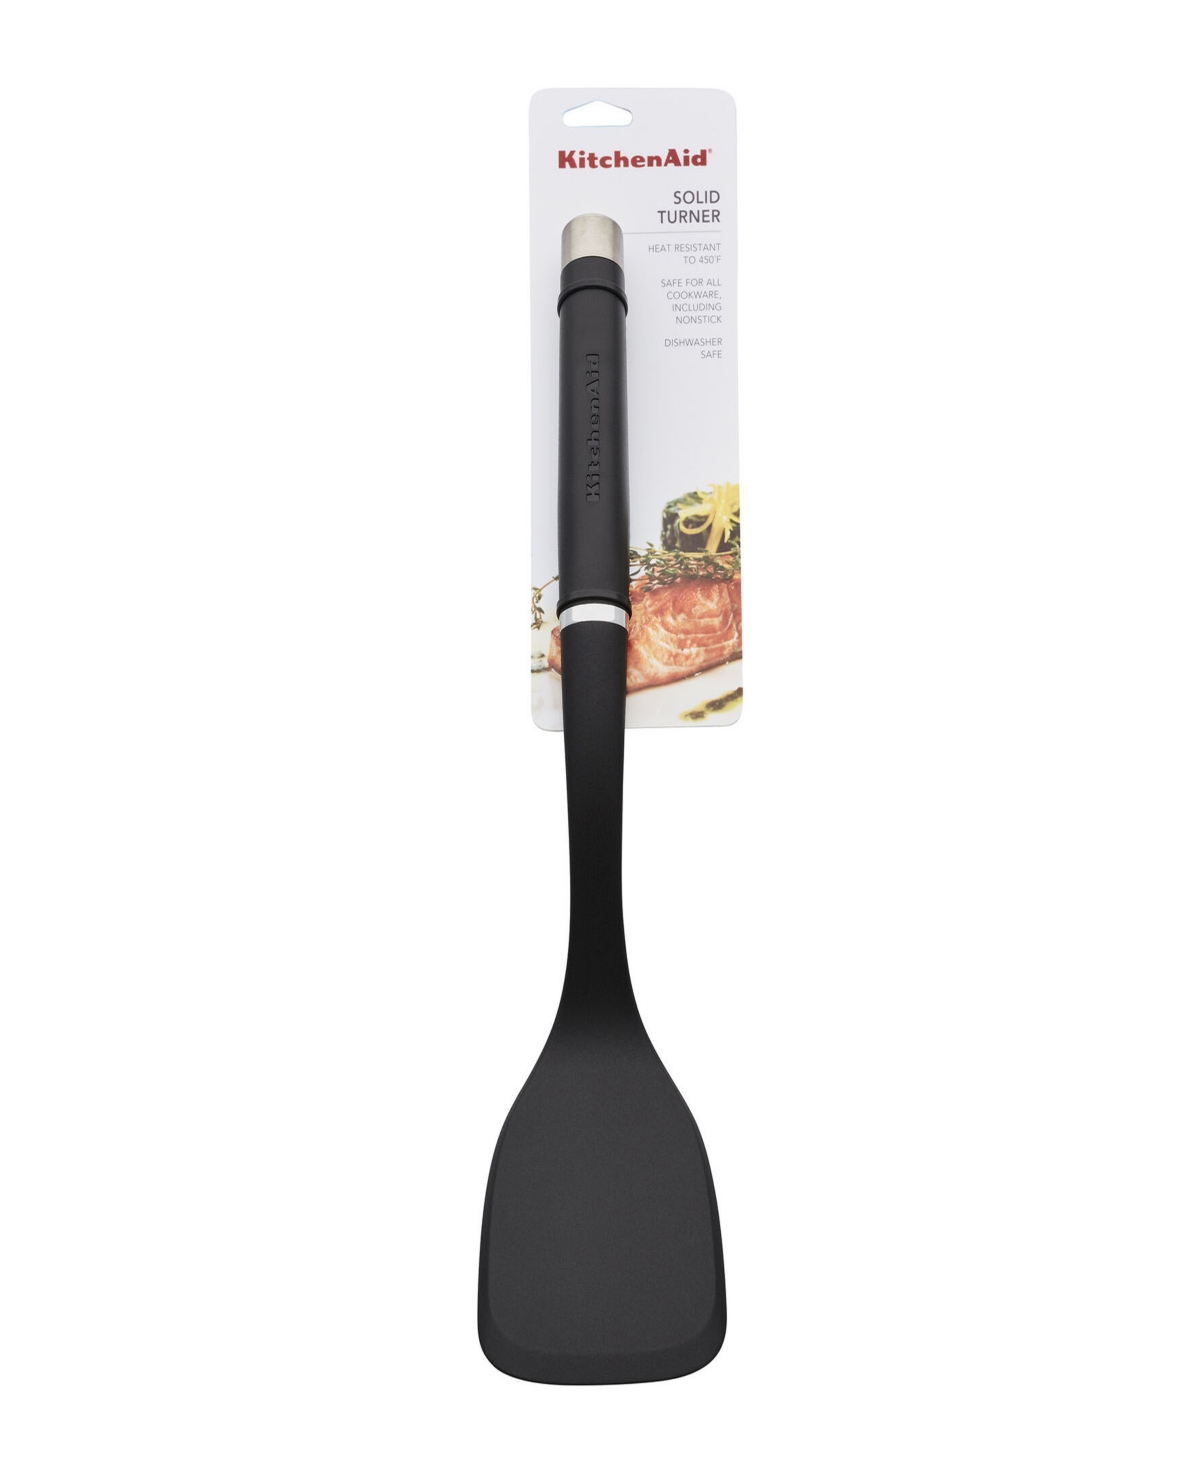 Shop Kitchenaid Gourmet Large Solid Turner, One Size In Onyx Black